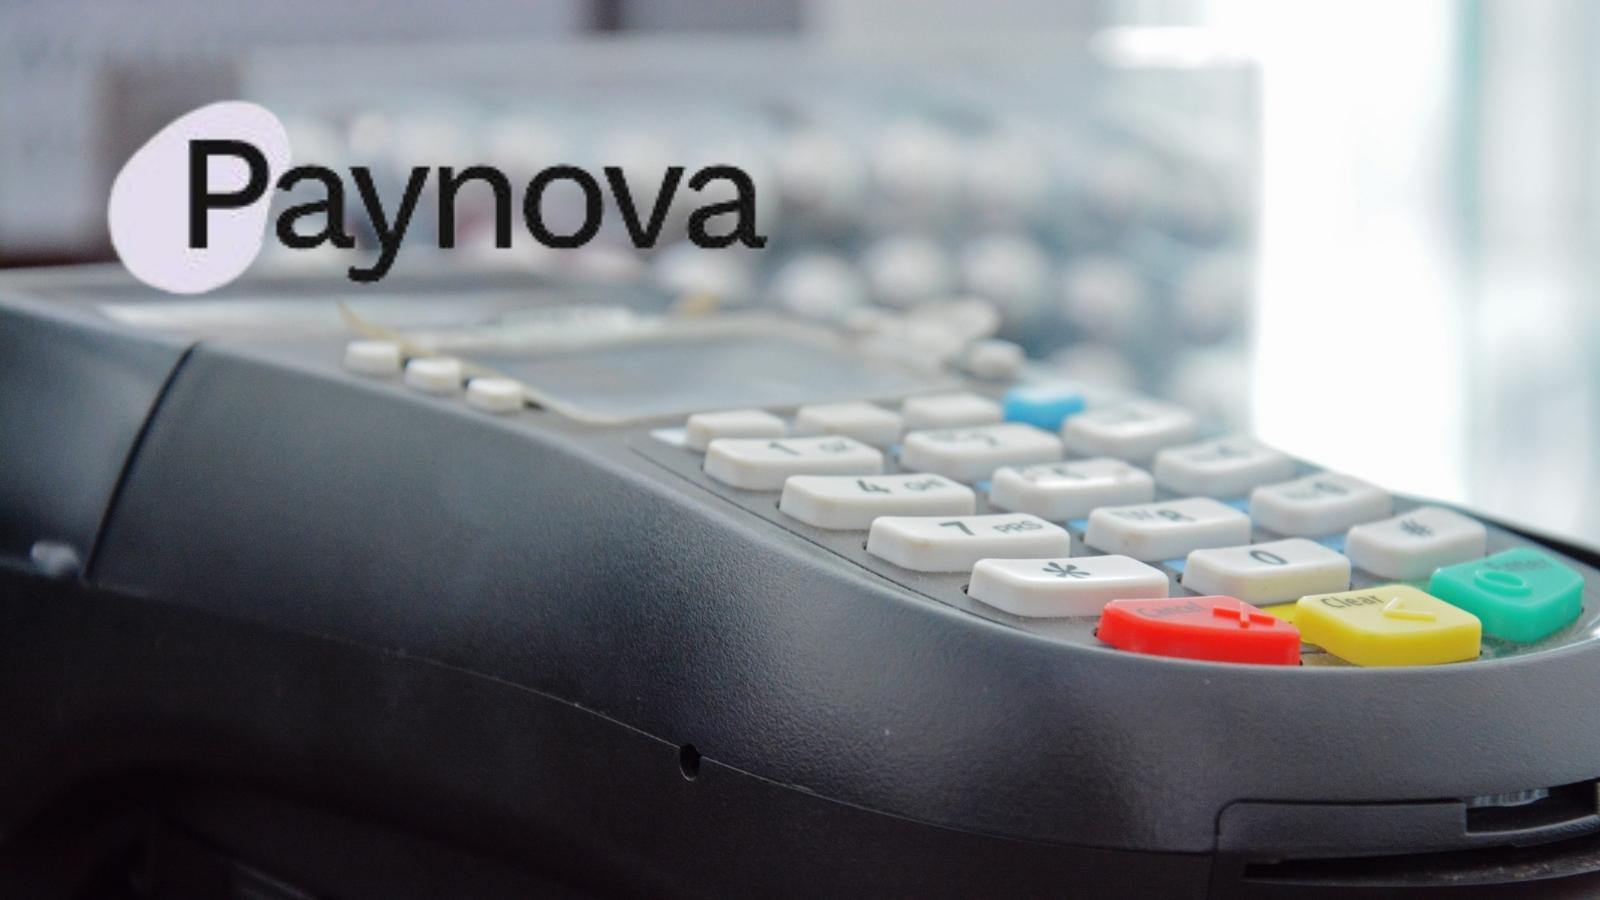 Paynova for payments